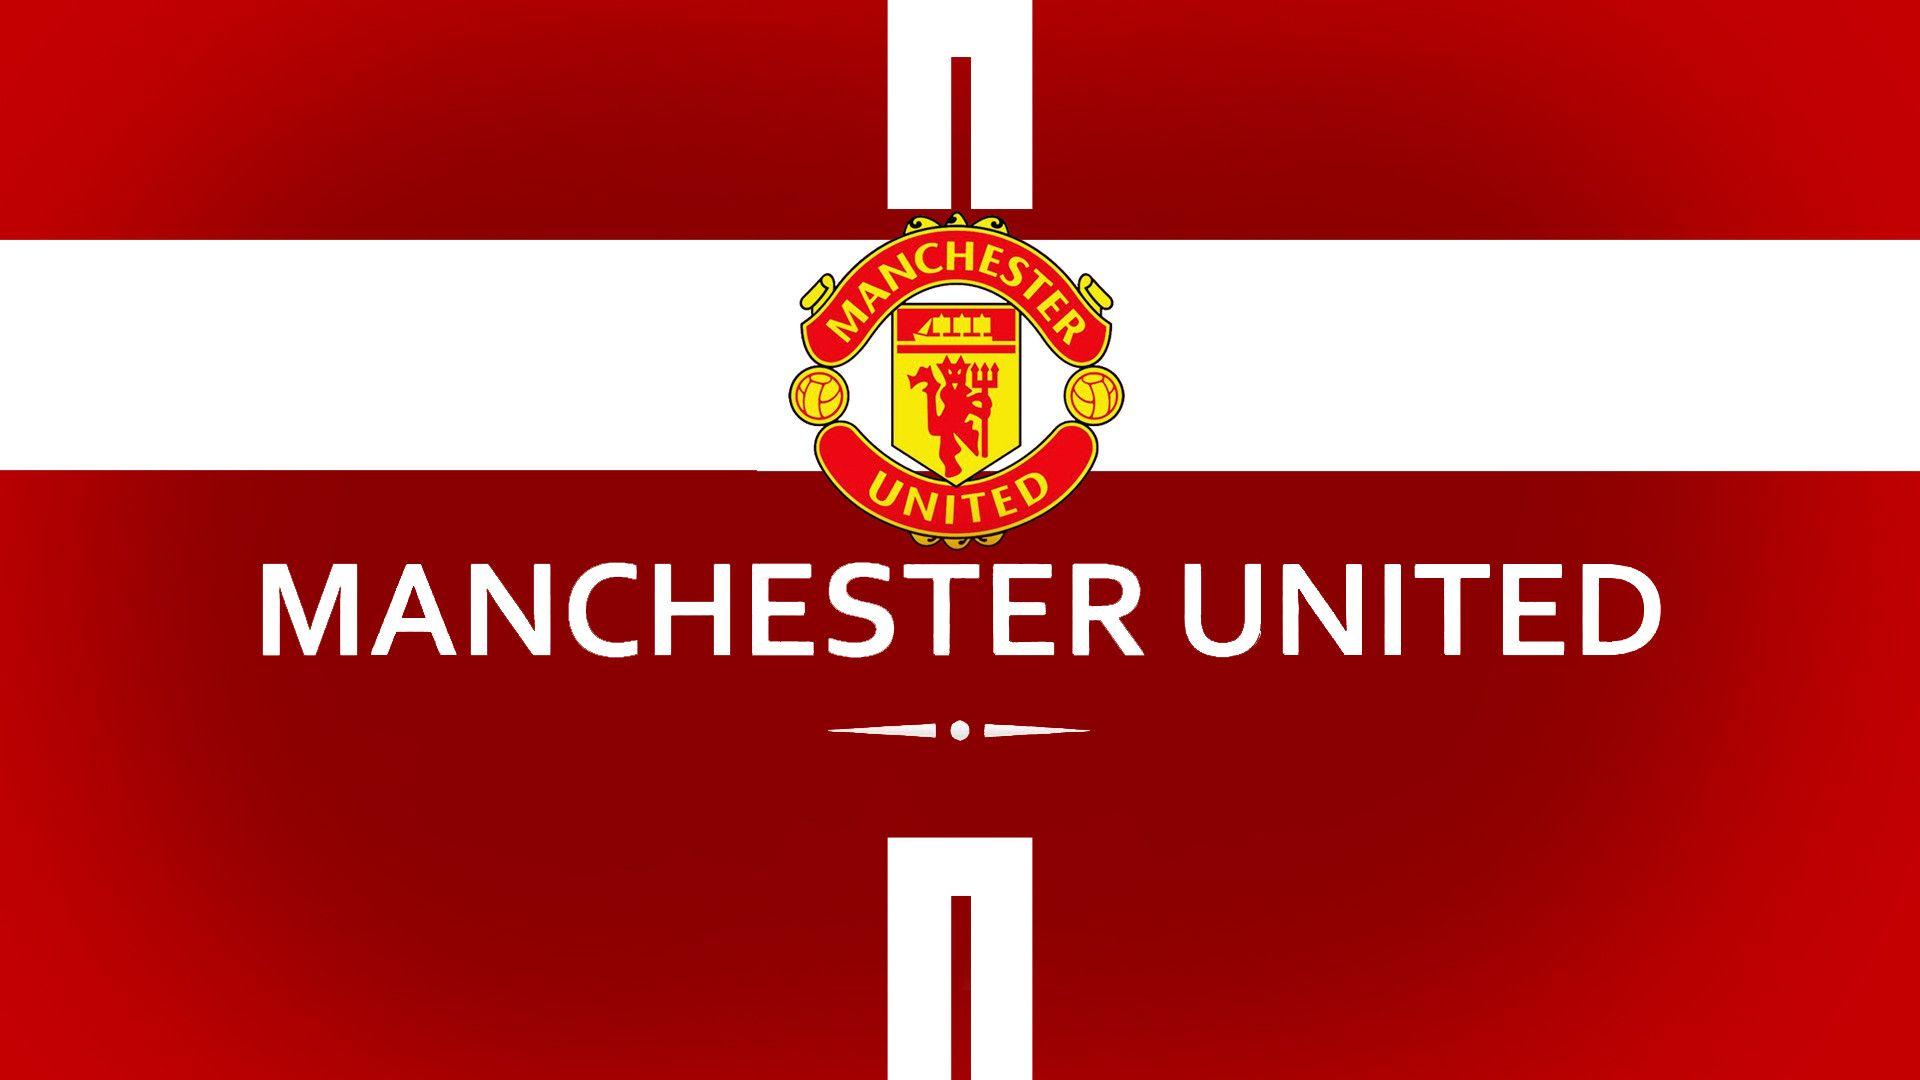 Sport: Manchester United Wallpapers Hd, manchester united logo hd